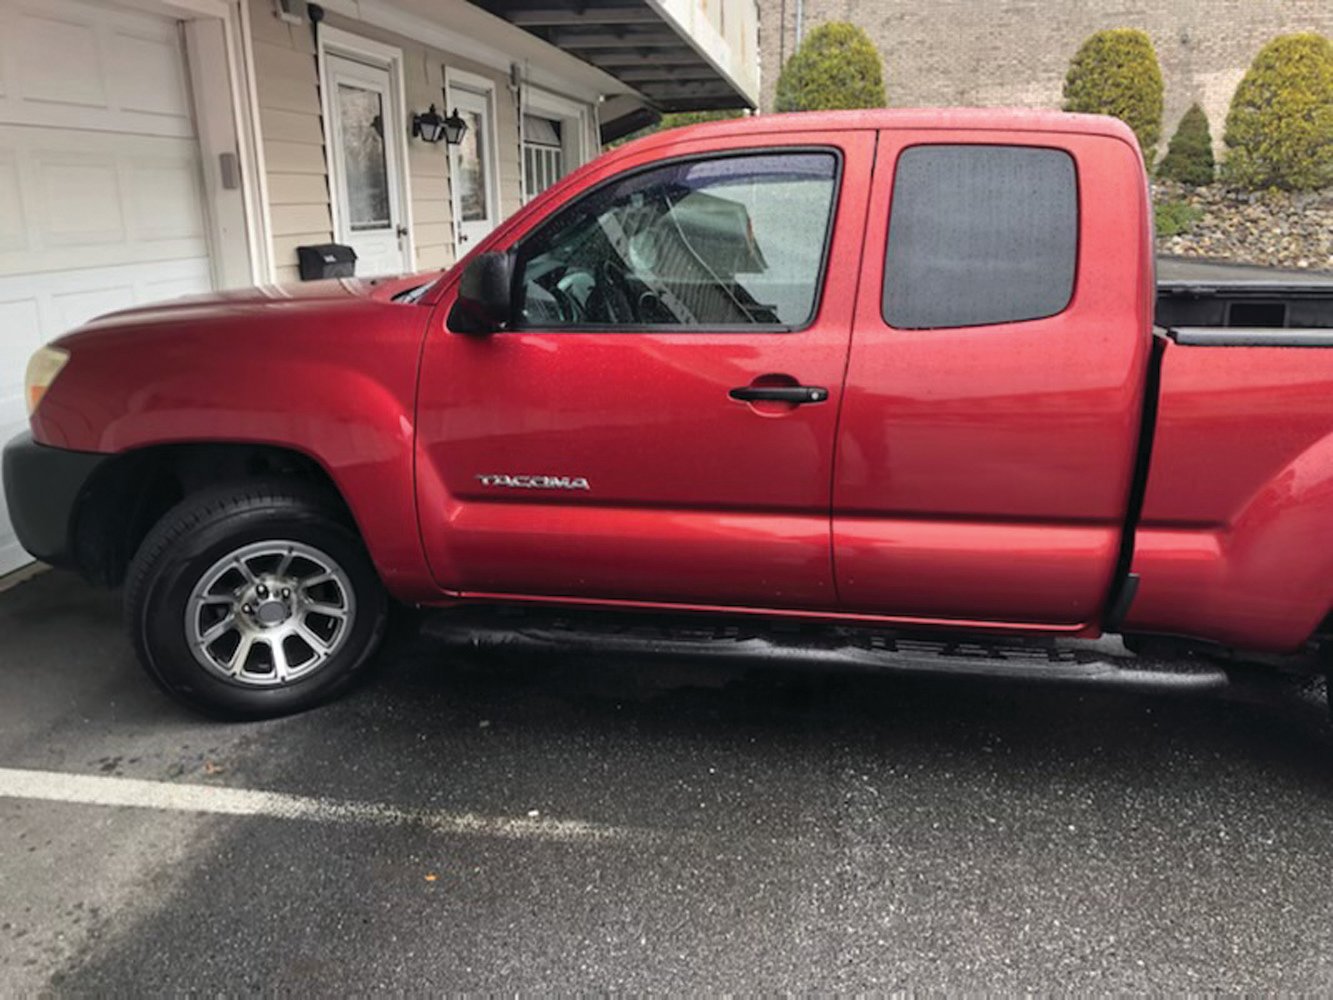 SEEN THIS TRUCK? Warwick Police are also looking for Charlotte Lester’s vehicle, a 2006 Red Toyota Tacoma pickup truck, with a black front bumper and aftermarket rims, possibly bearing RI registration 1IL194. (Photo courtesy Warwick Police)